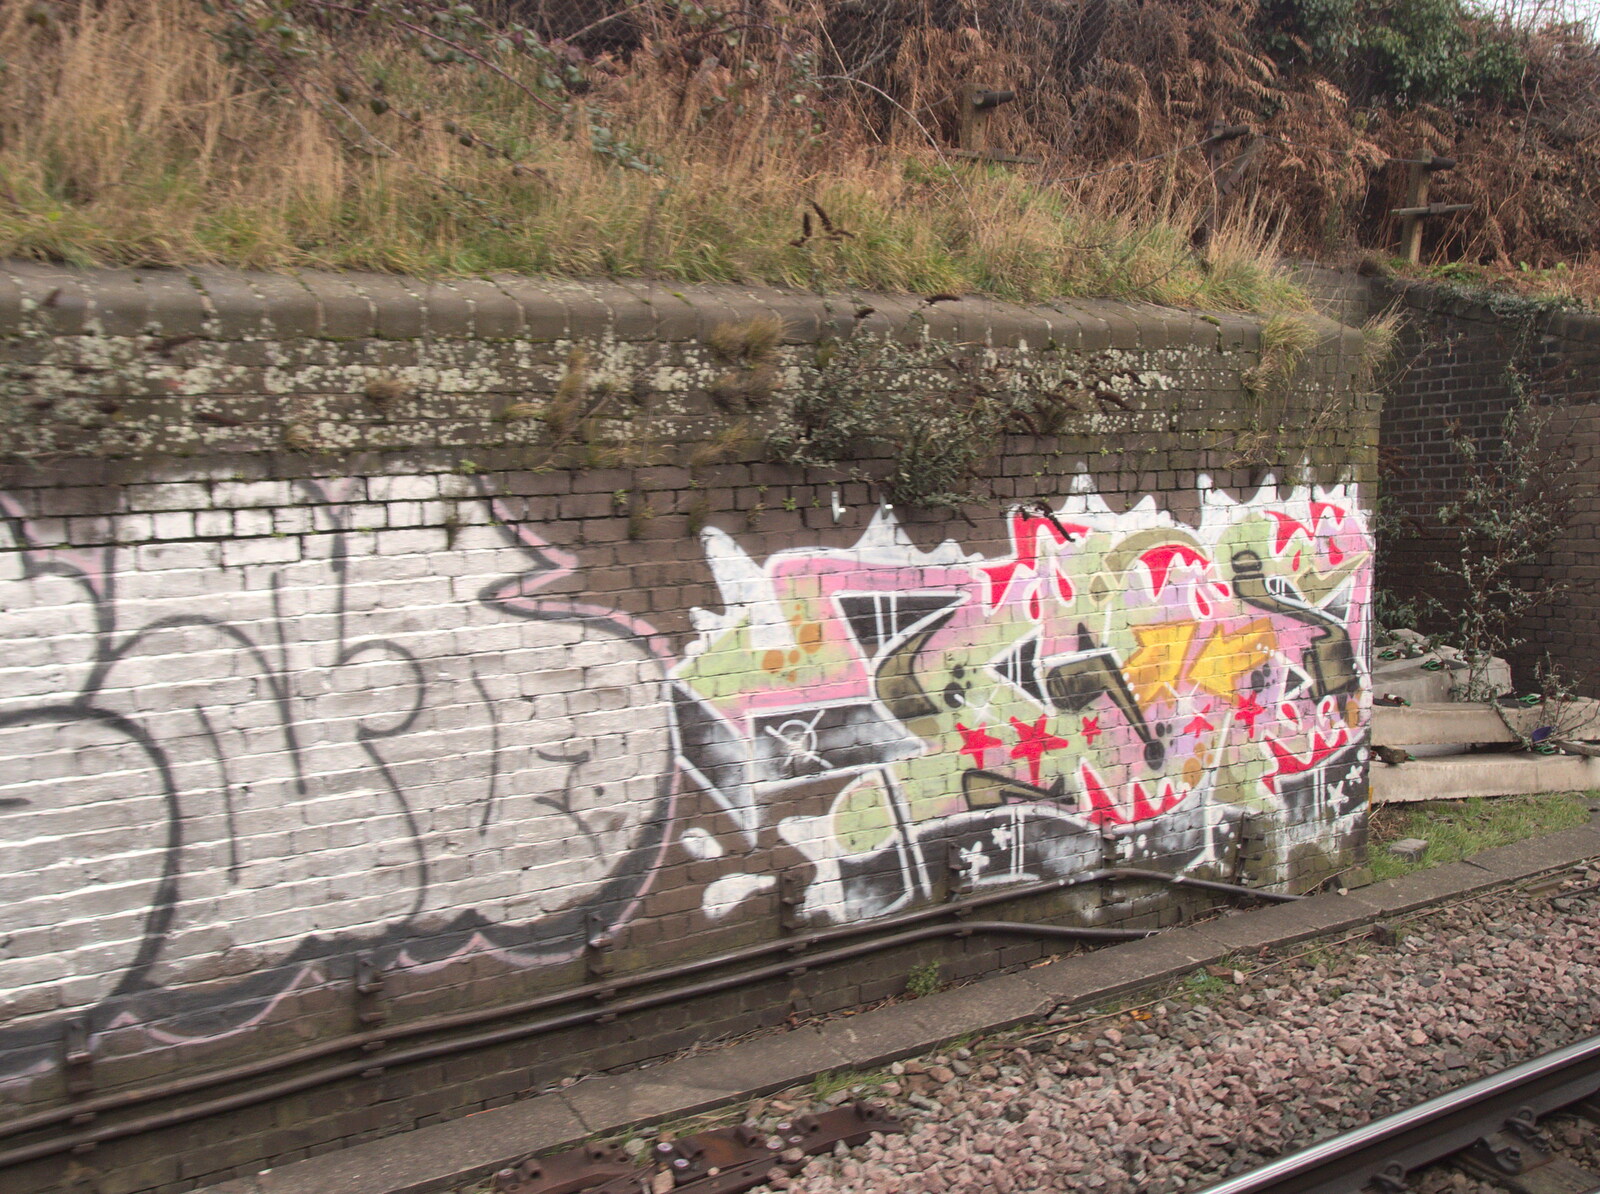 Graffiti on the railway from Grandad's Fire and SwiftKey Moves Offices, Eye and Paddington - 23rd January 2017